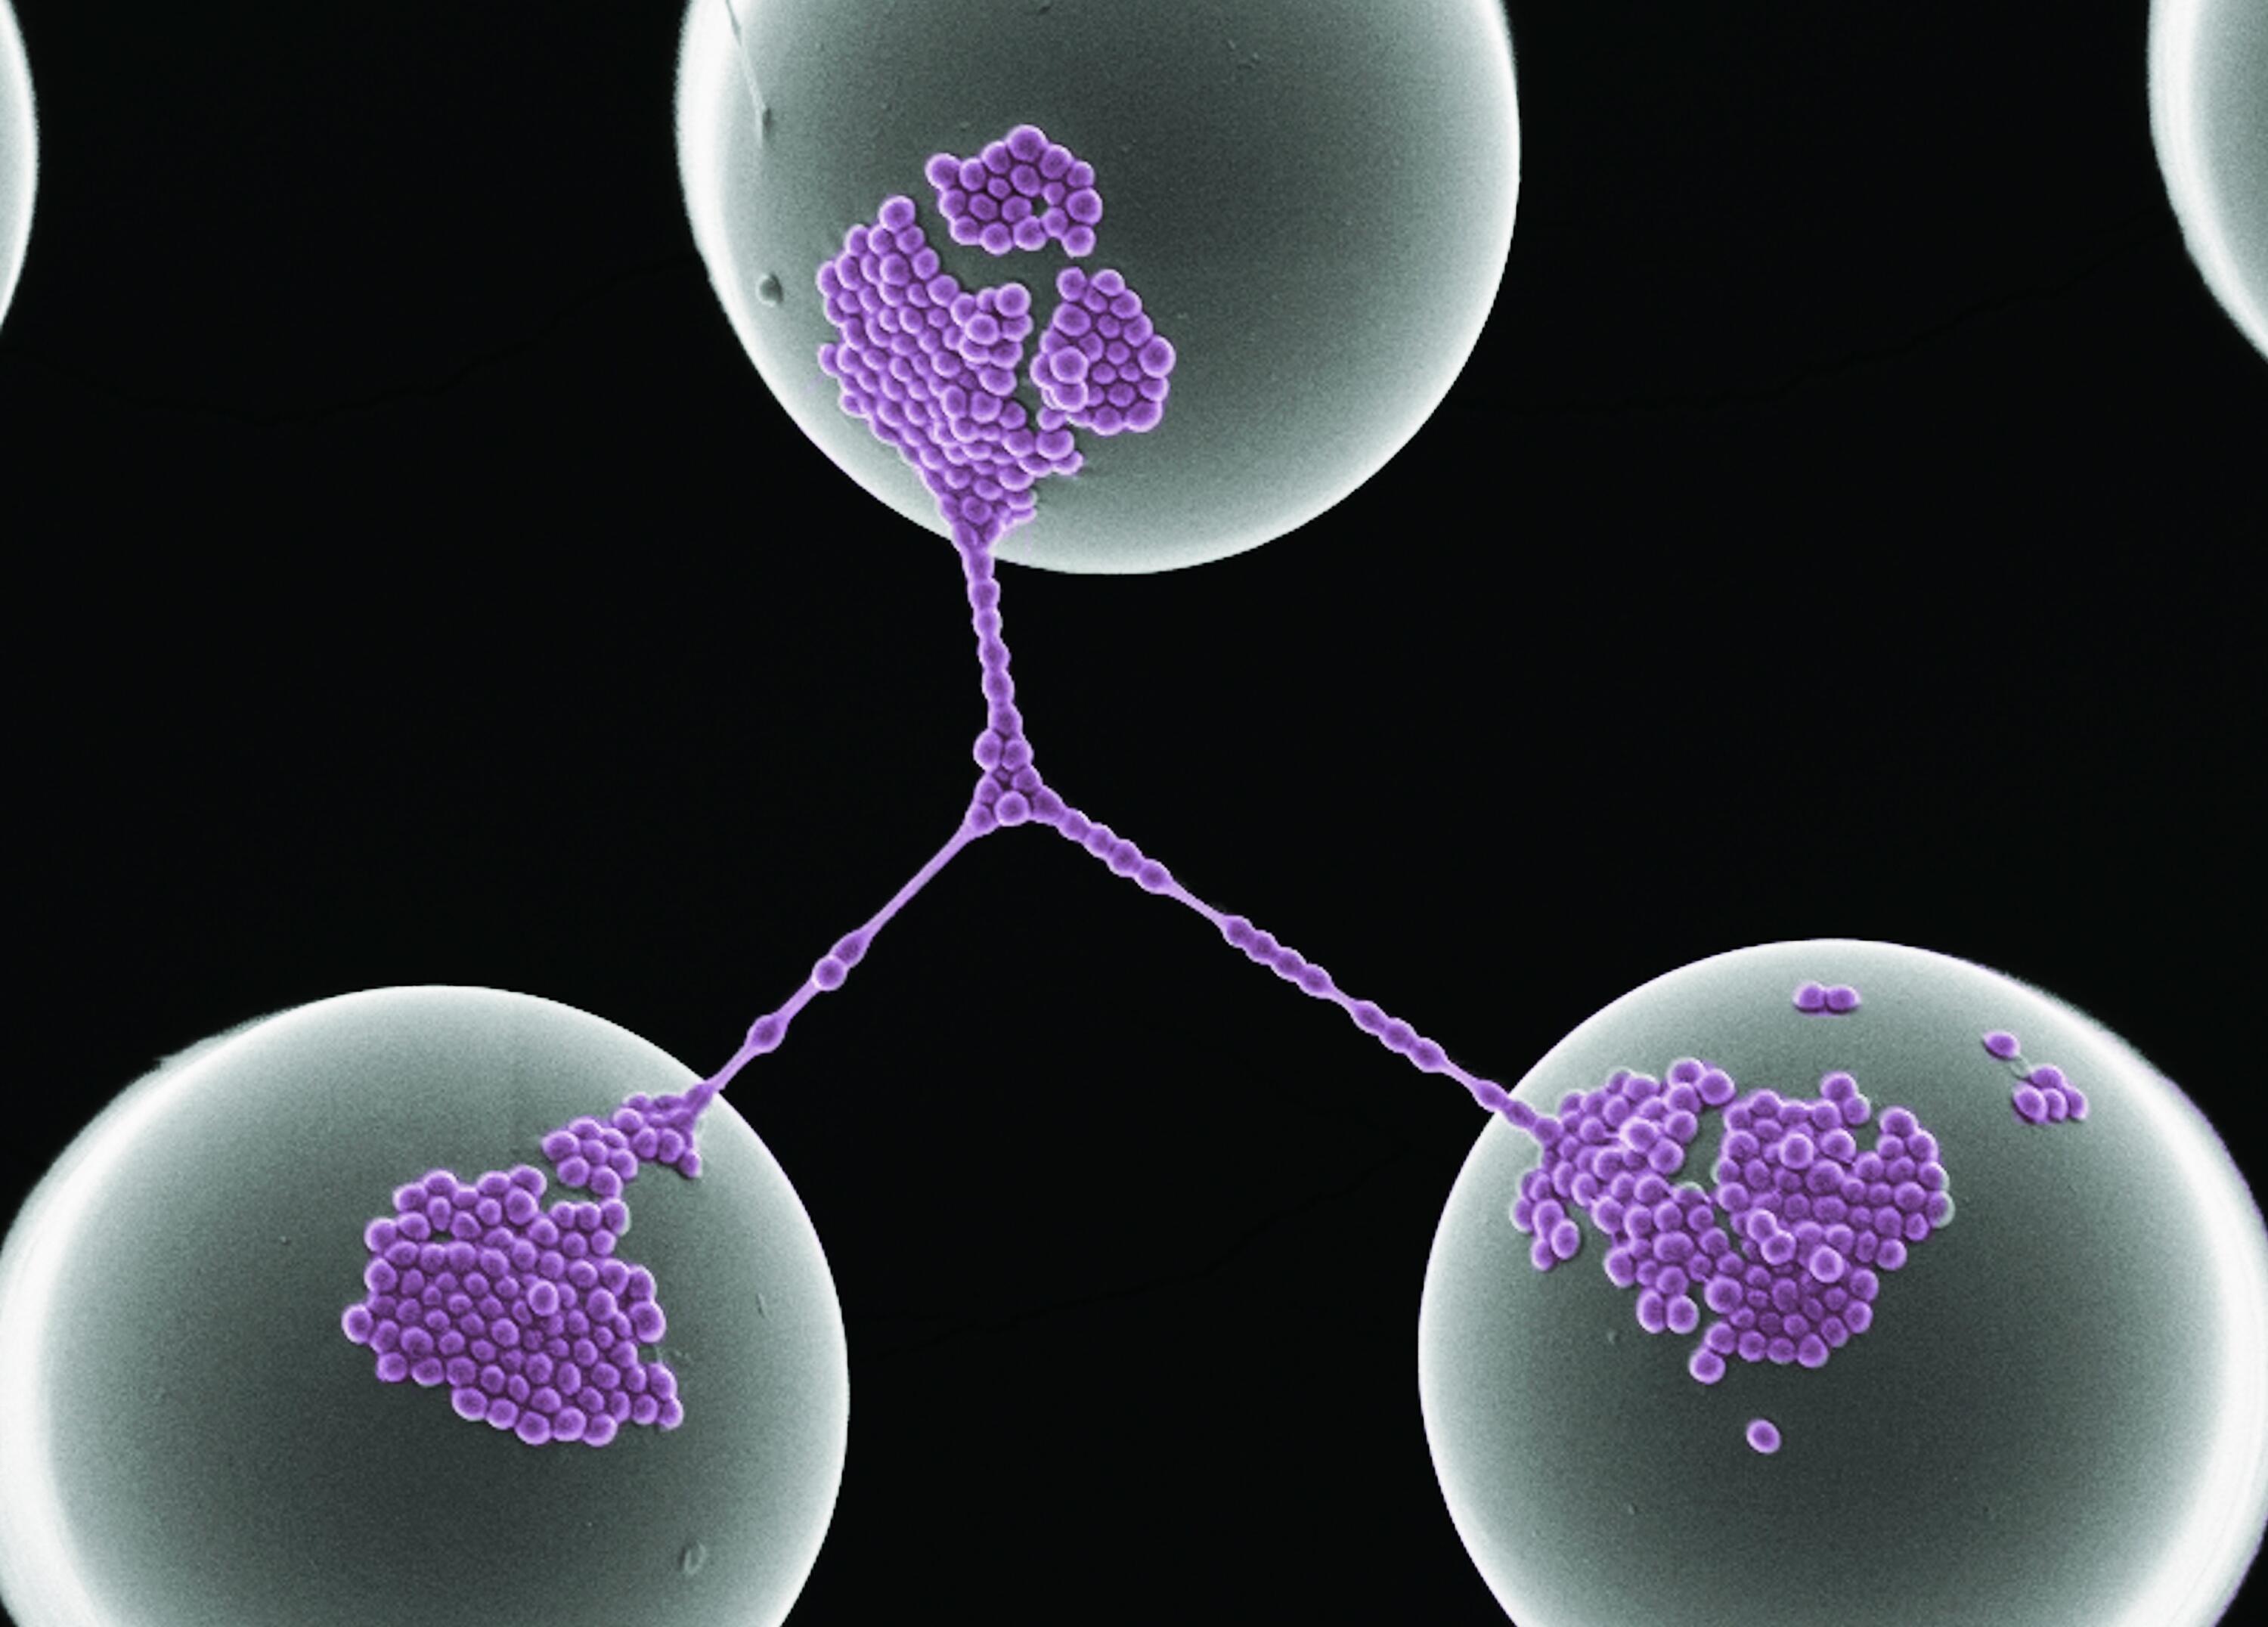 Three bacteria cells connected to each other